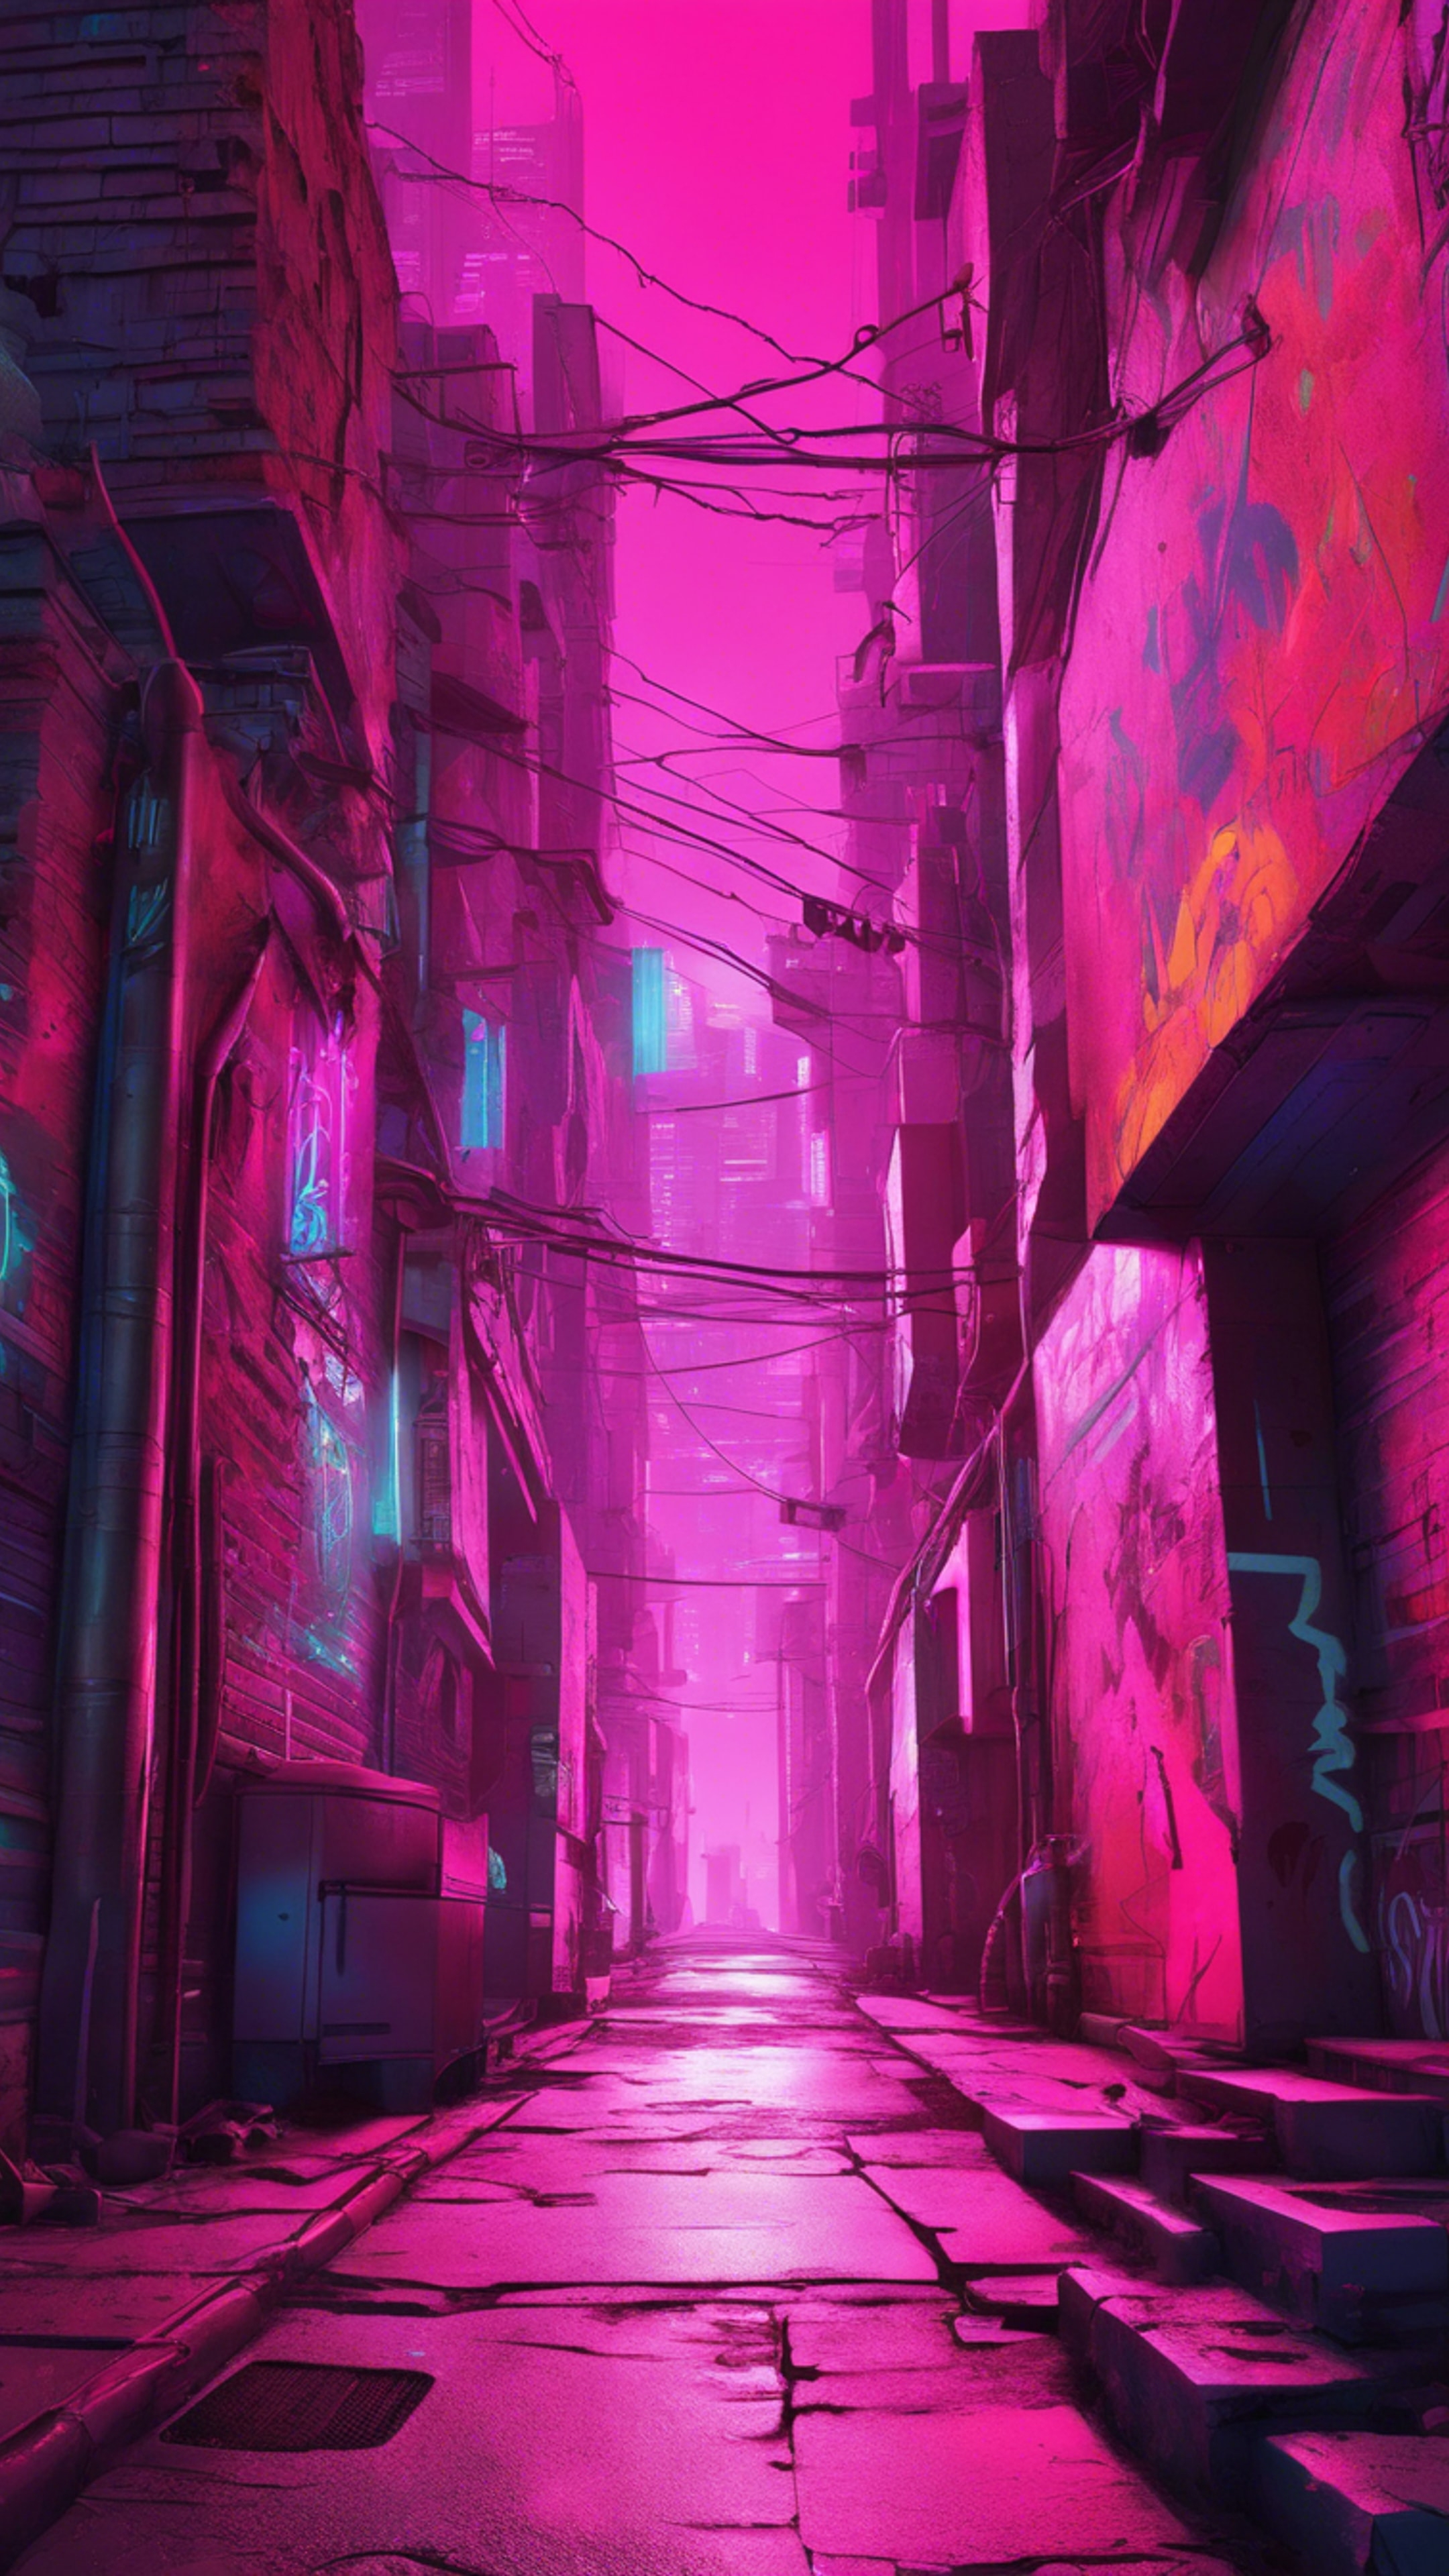 A neon-lit city alley at midnight, with bright pink graffiti on the walls, radiating a cyberpunk aura. Tapet[6a5b63b1eaec4ac98291]